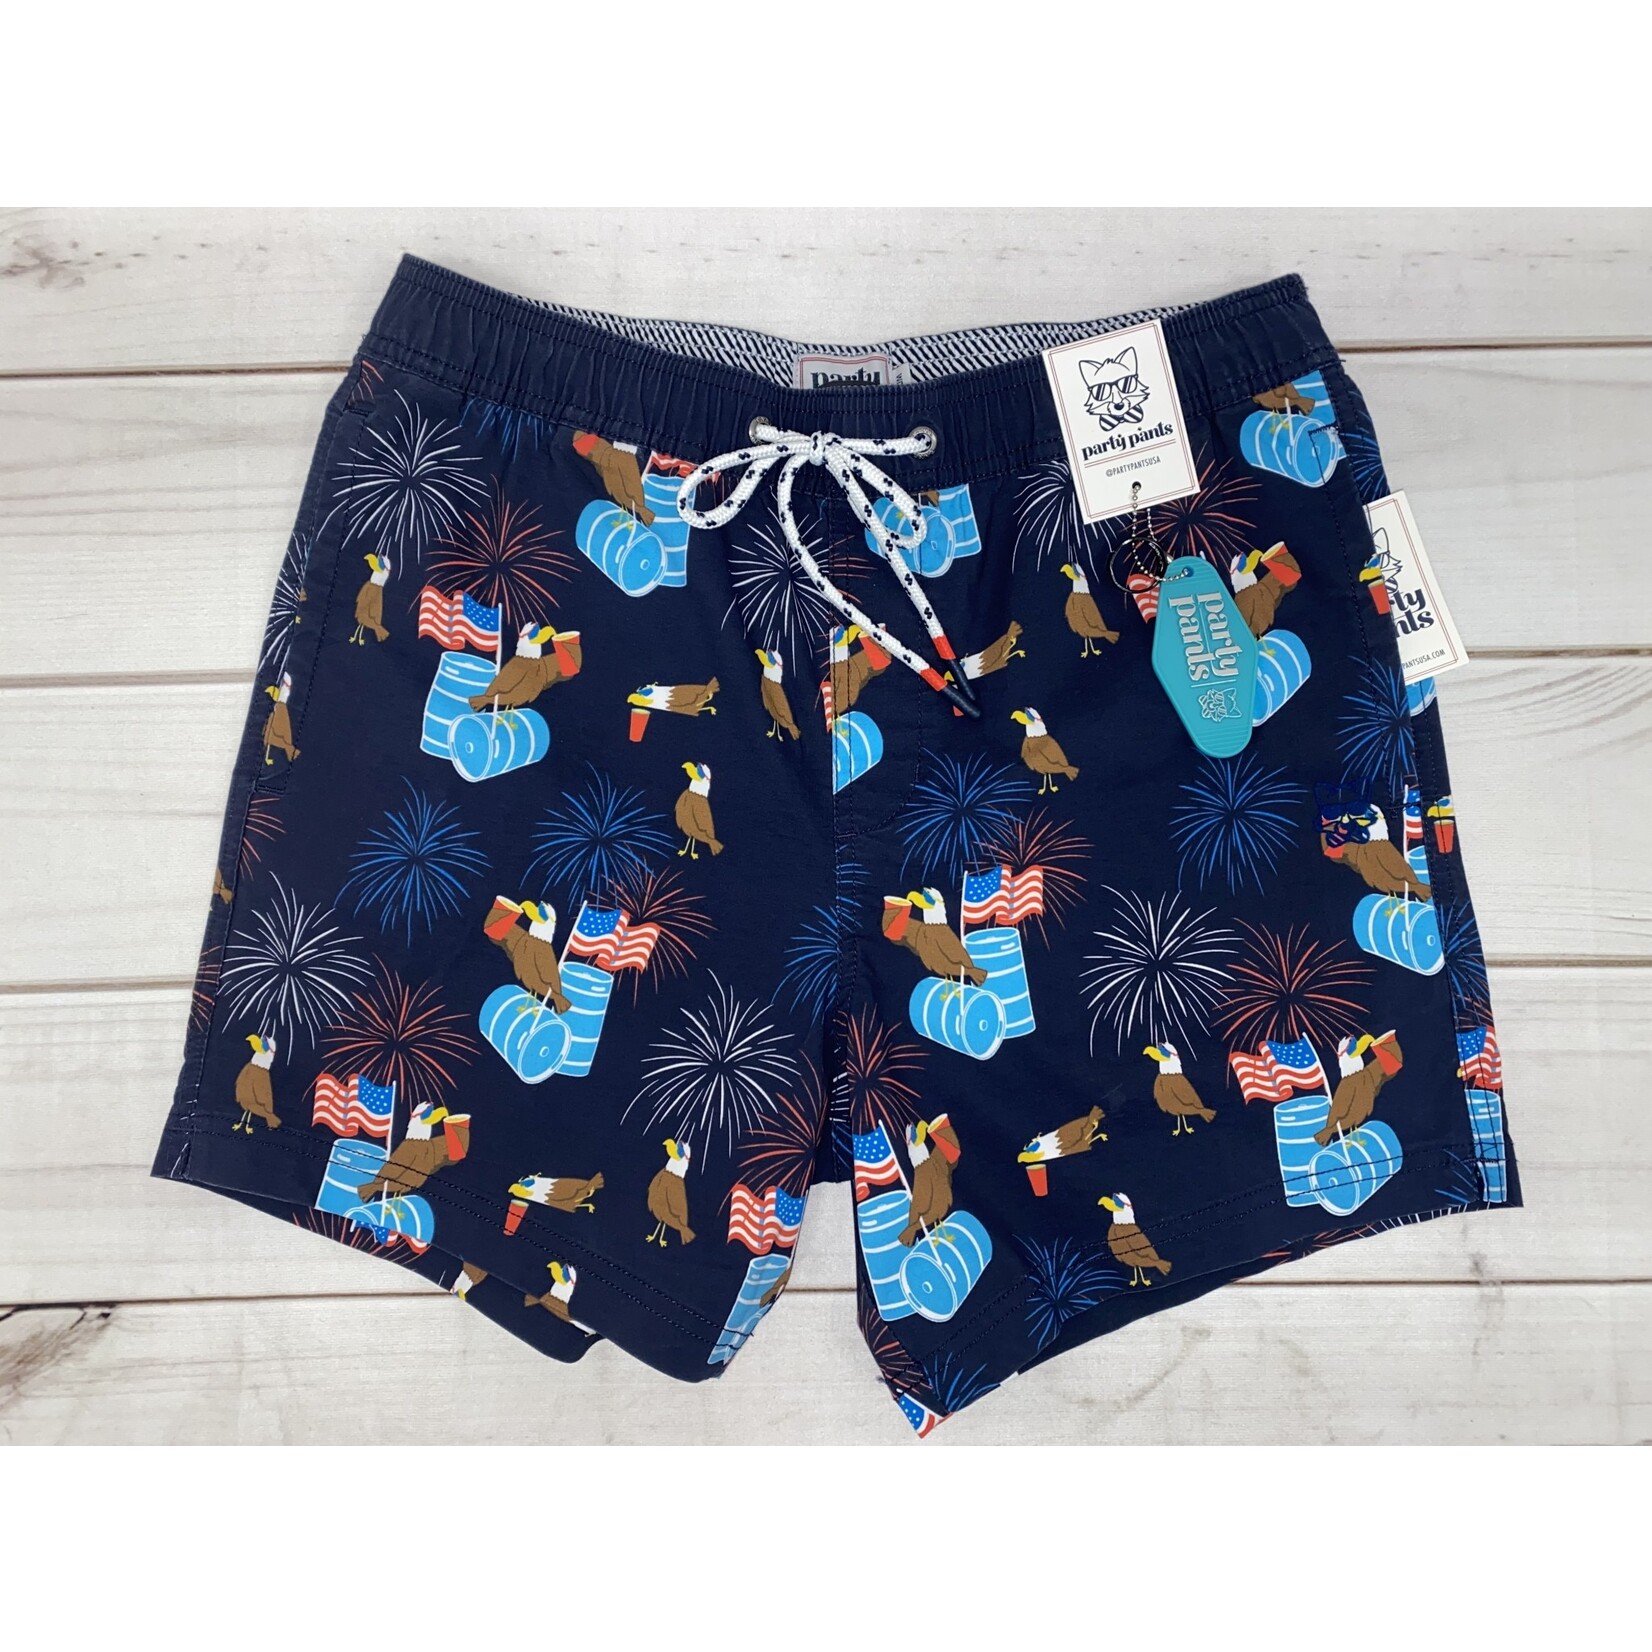 Party Pants Old Glory shorts Navy